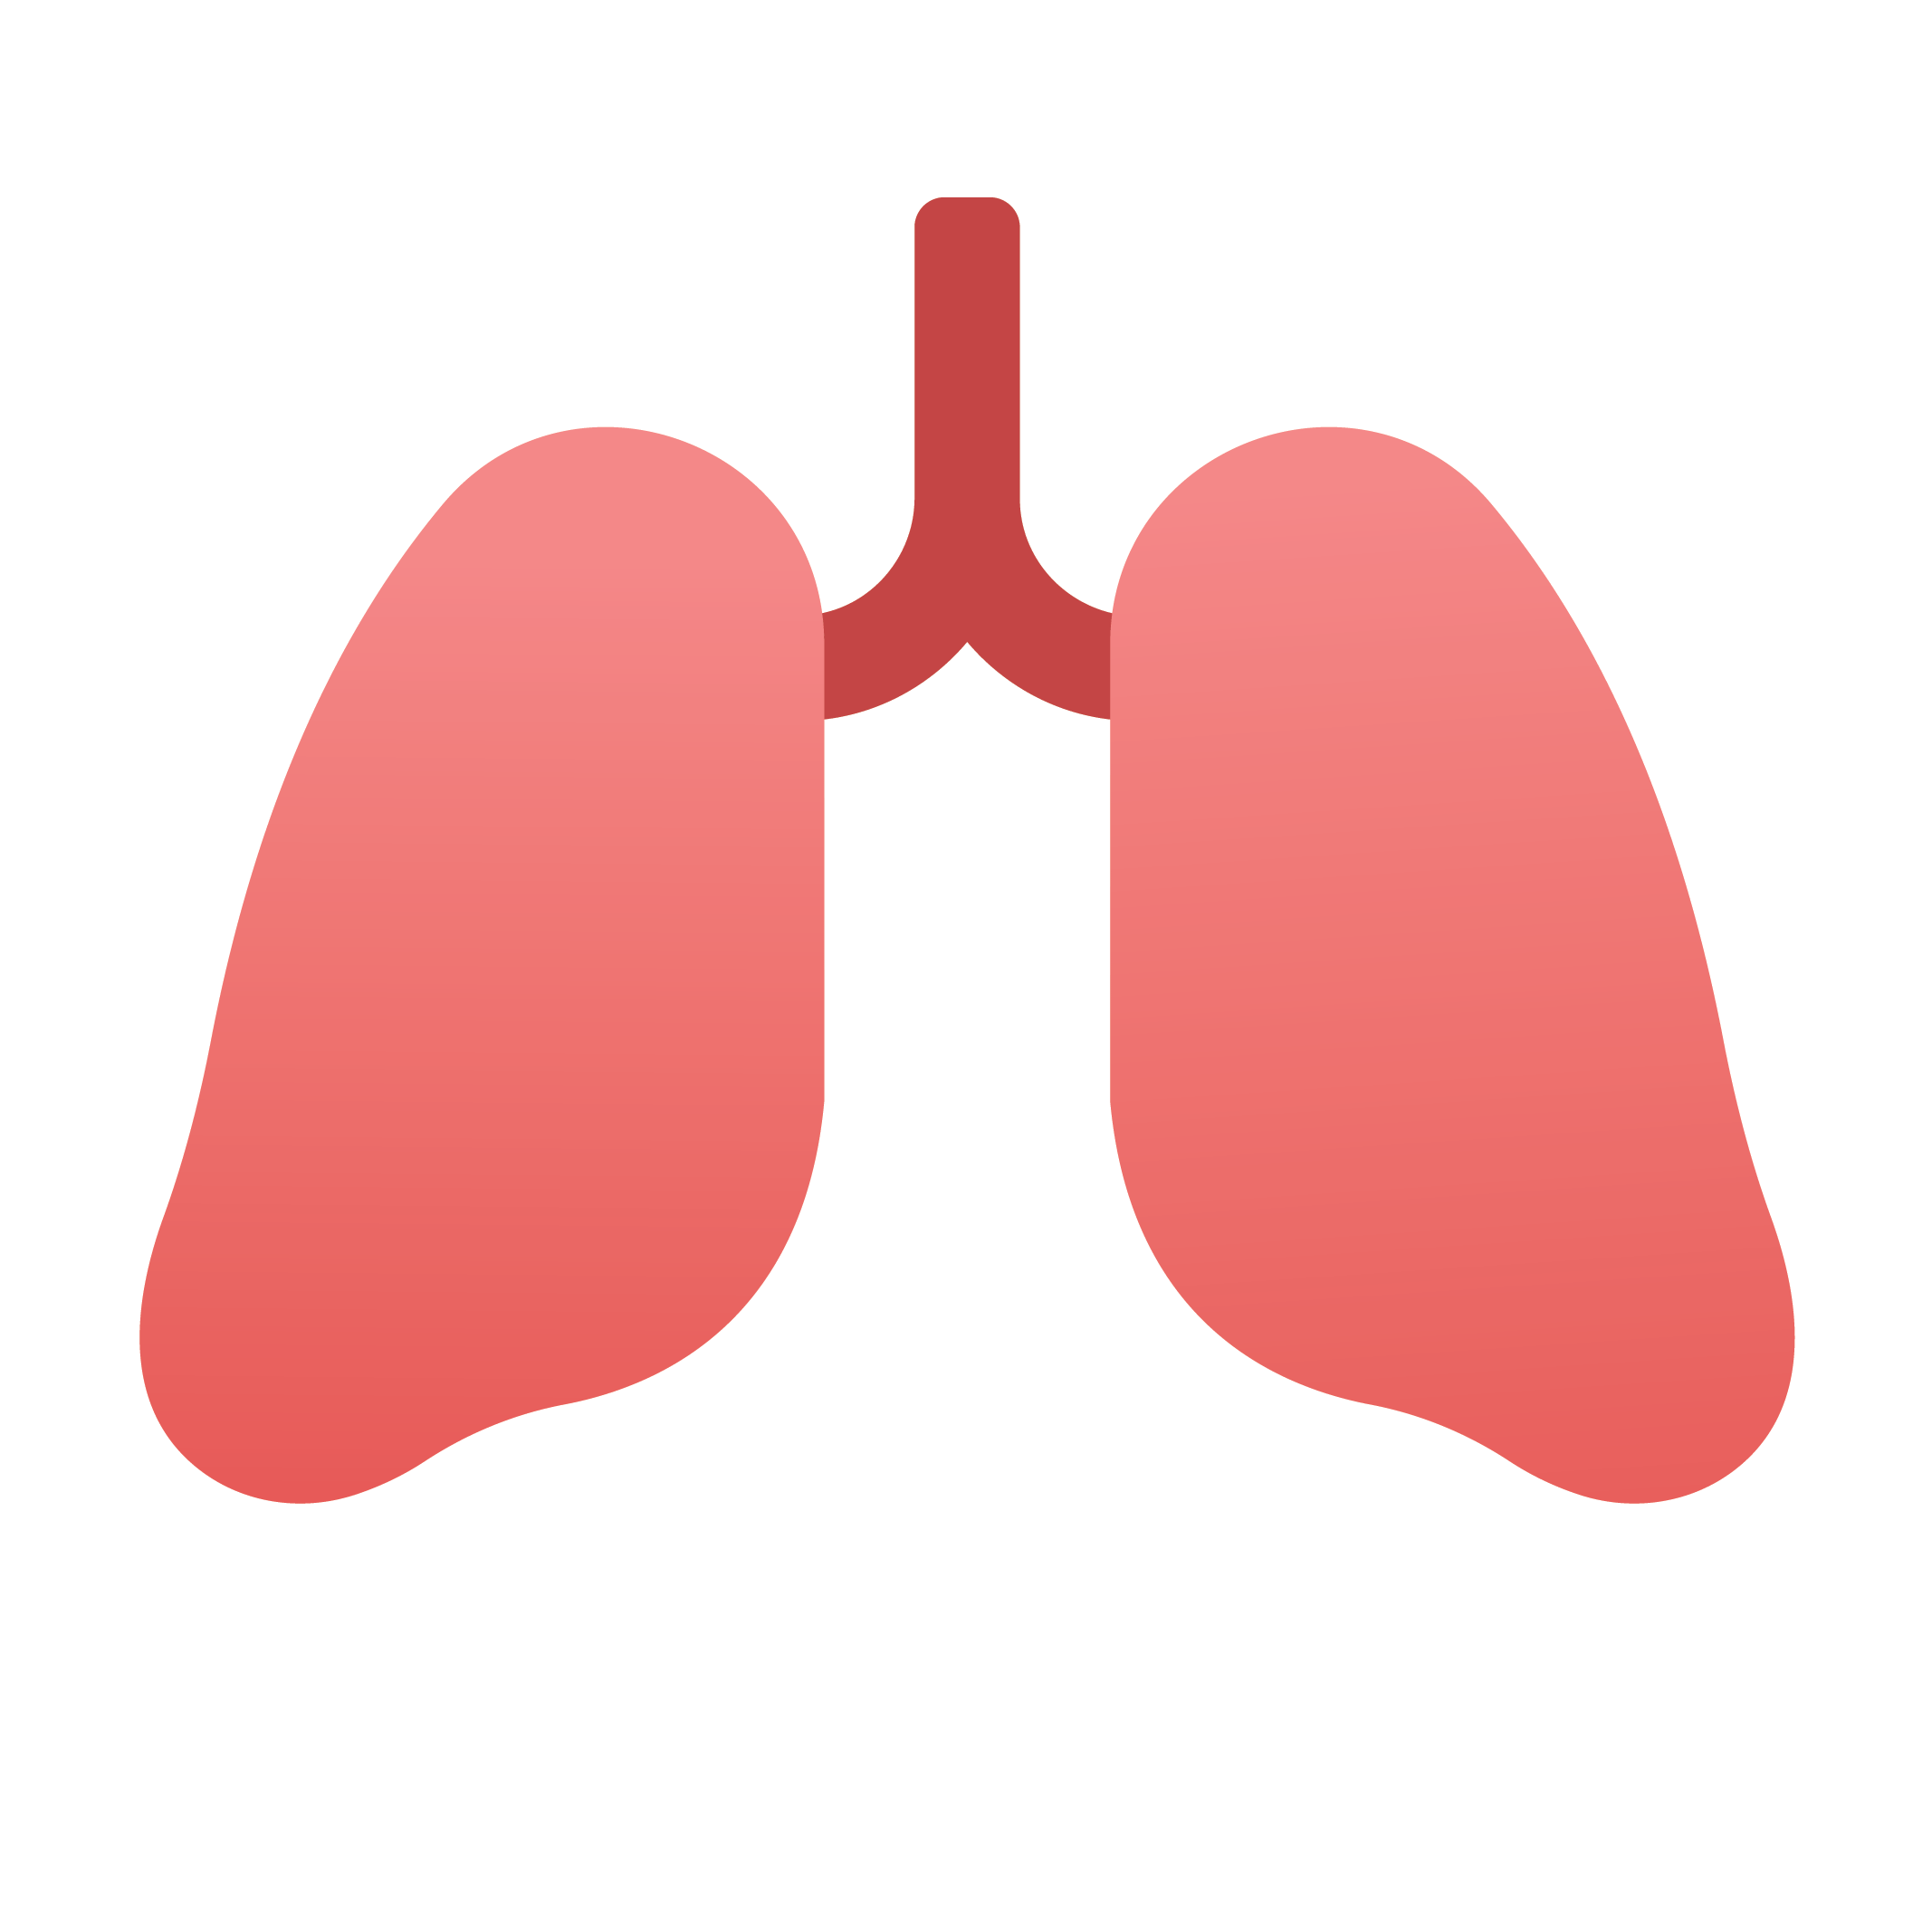 lung health